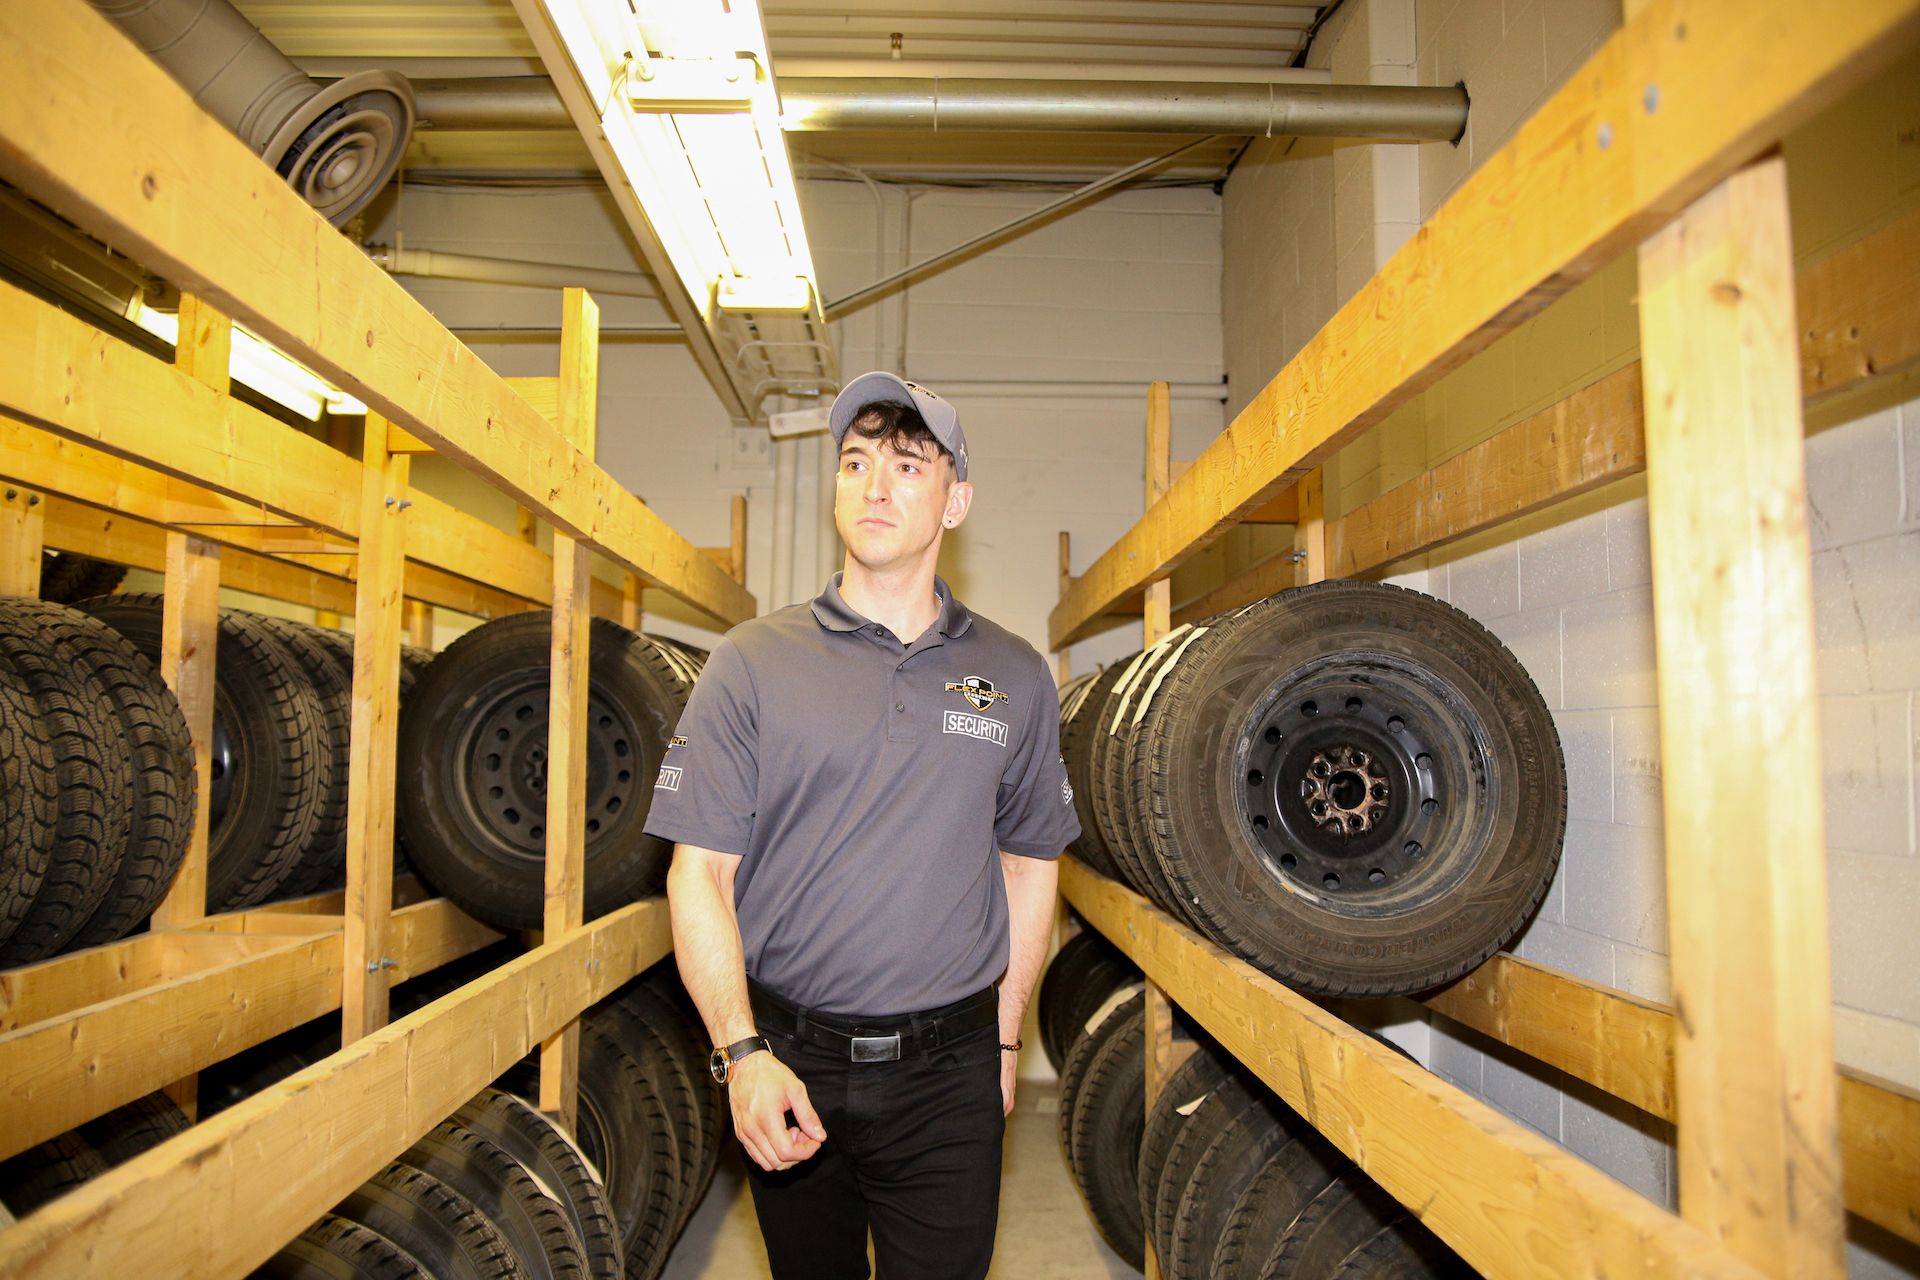 A male Flex Point Security guard patrolling an auto dealership's tire inventory storage room